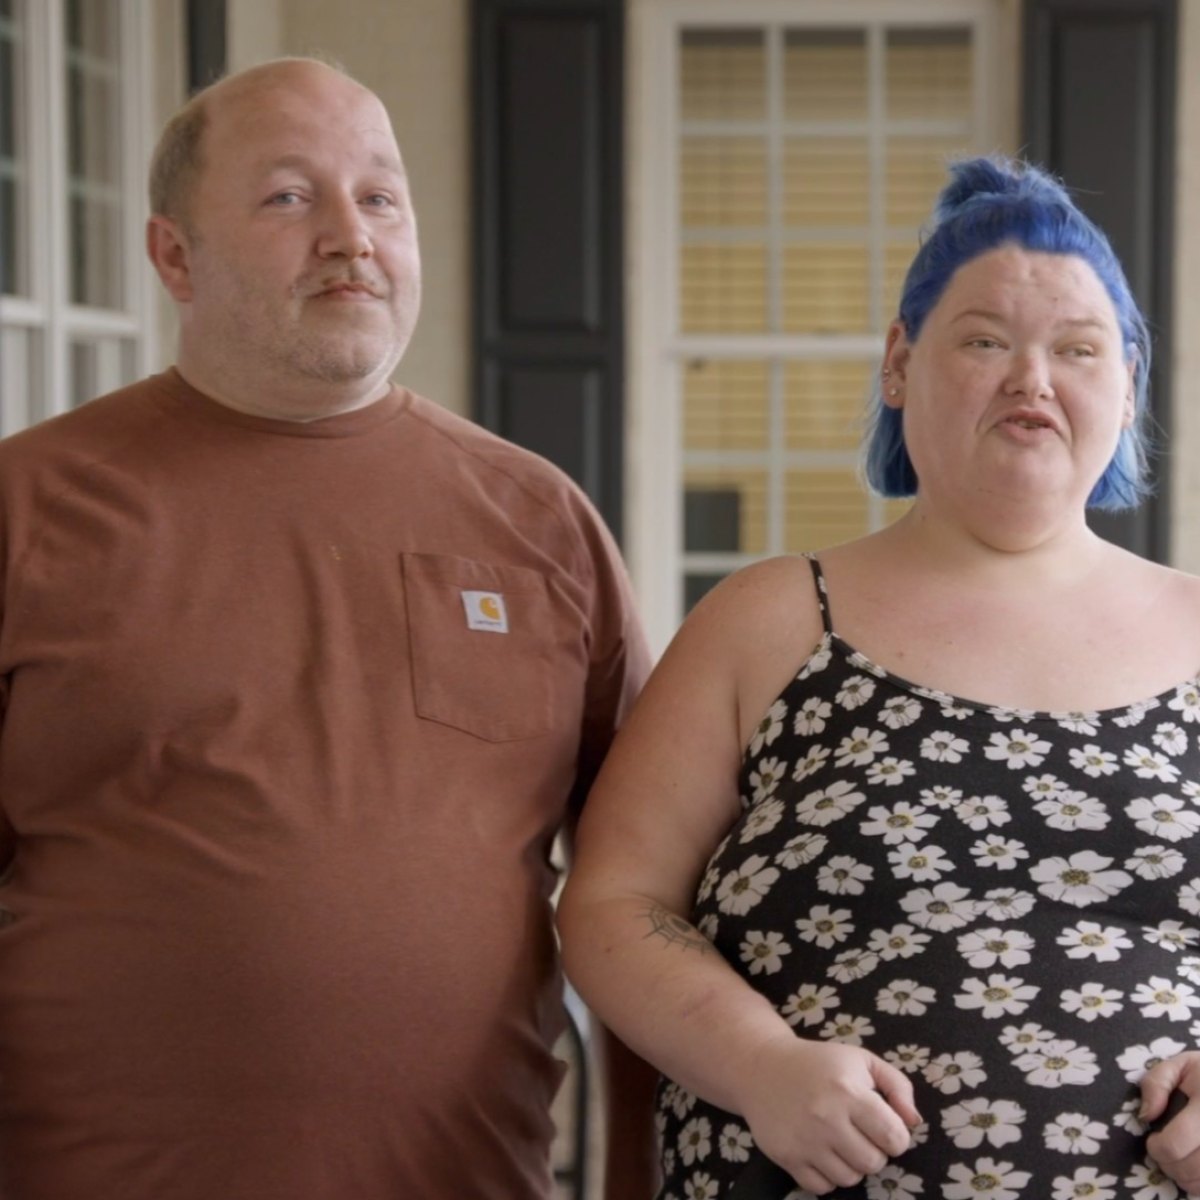 1000-Lb. Sisters' Amy Slaton is secretly dating Tony Rodgers and new couple  is living together in her Kentucky home